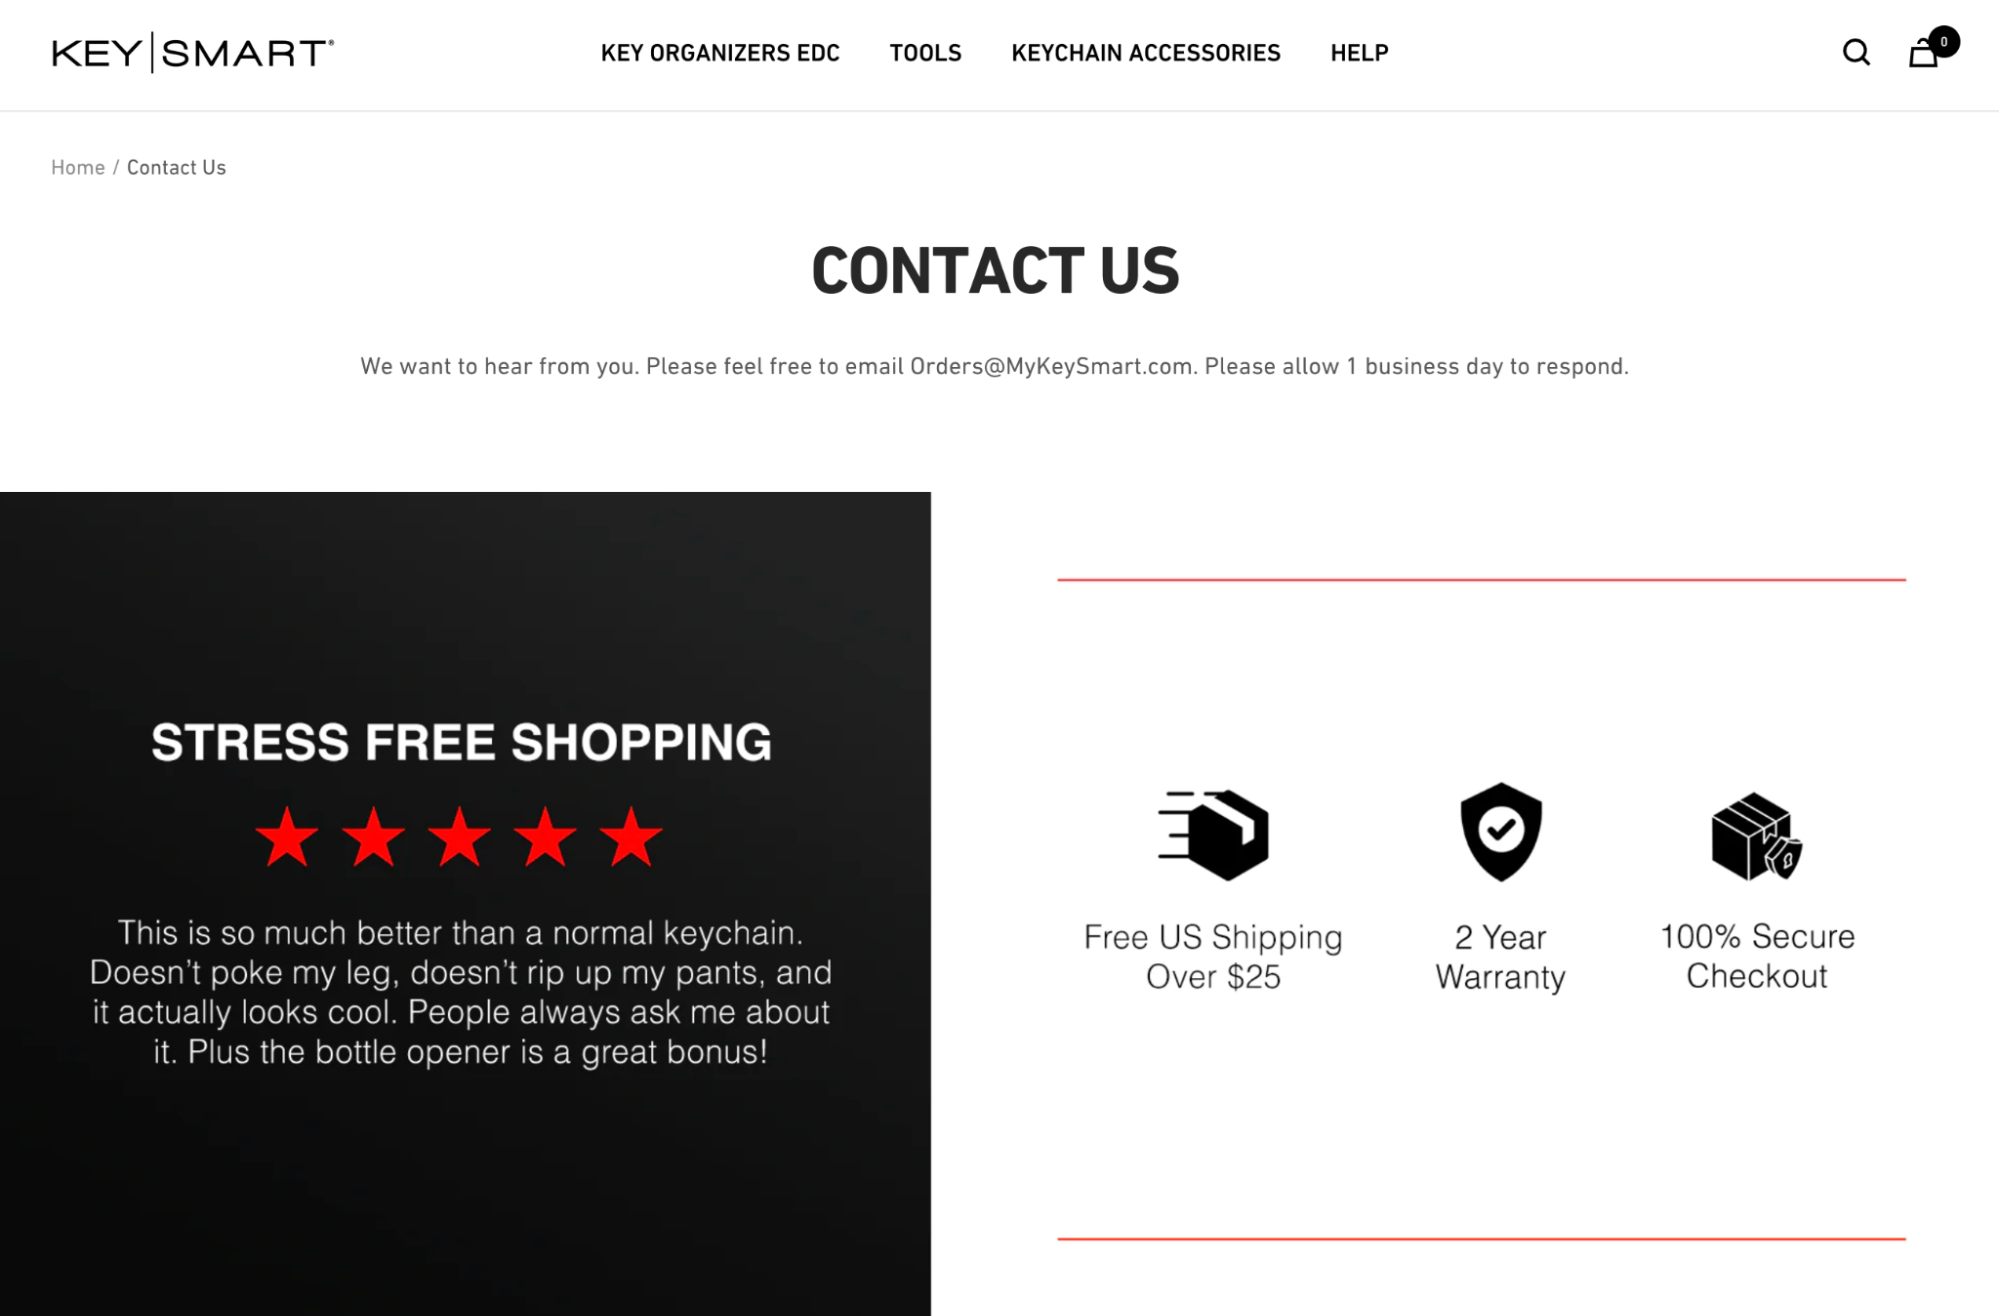 SKIMS: A Comprehensive Ecommerce Guide